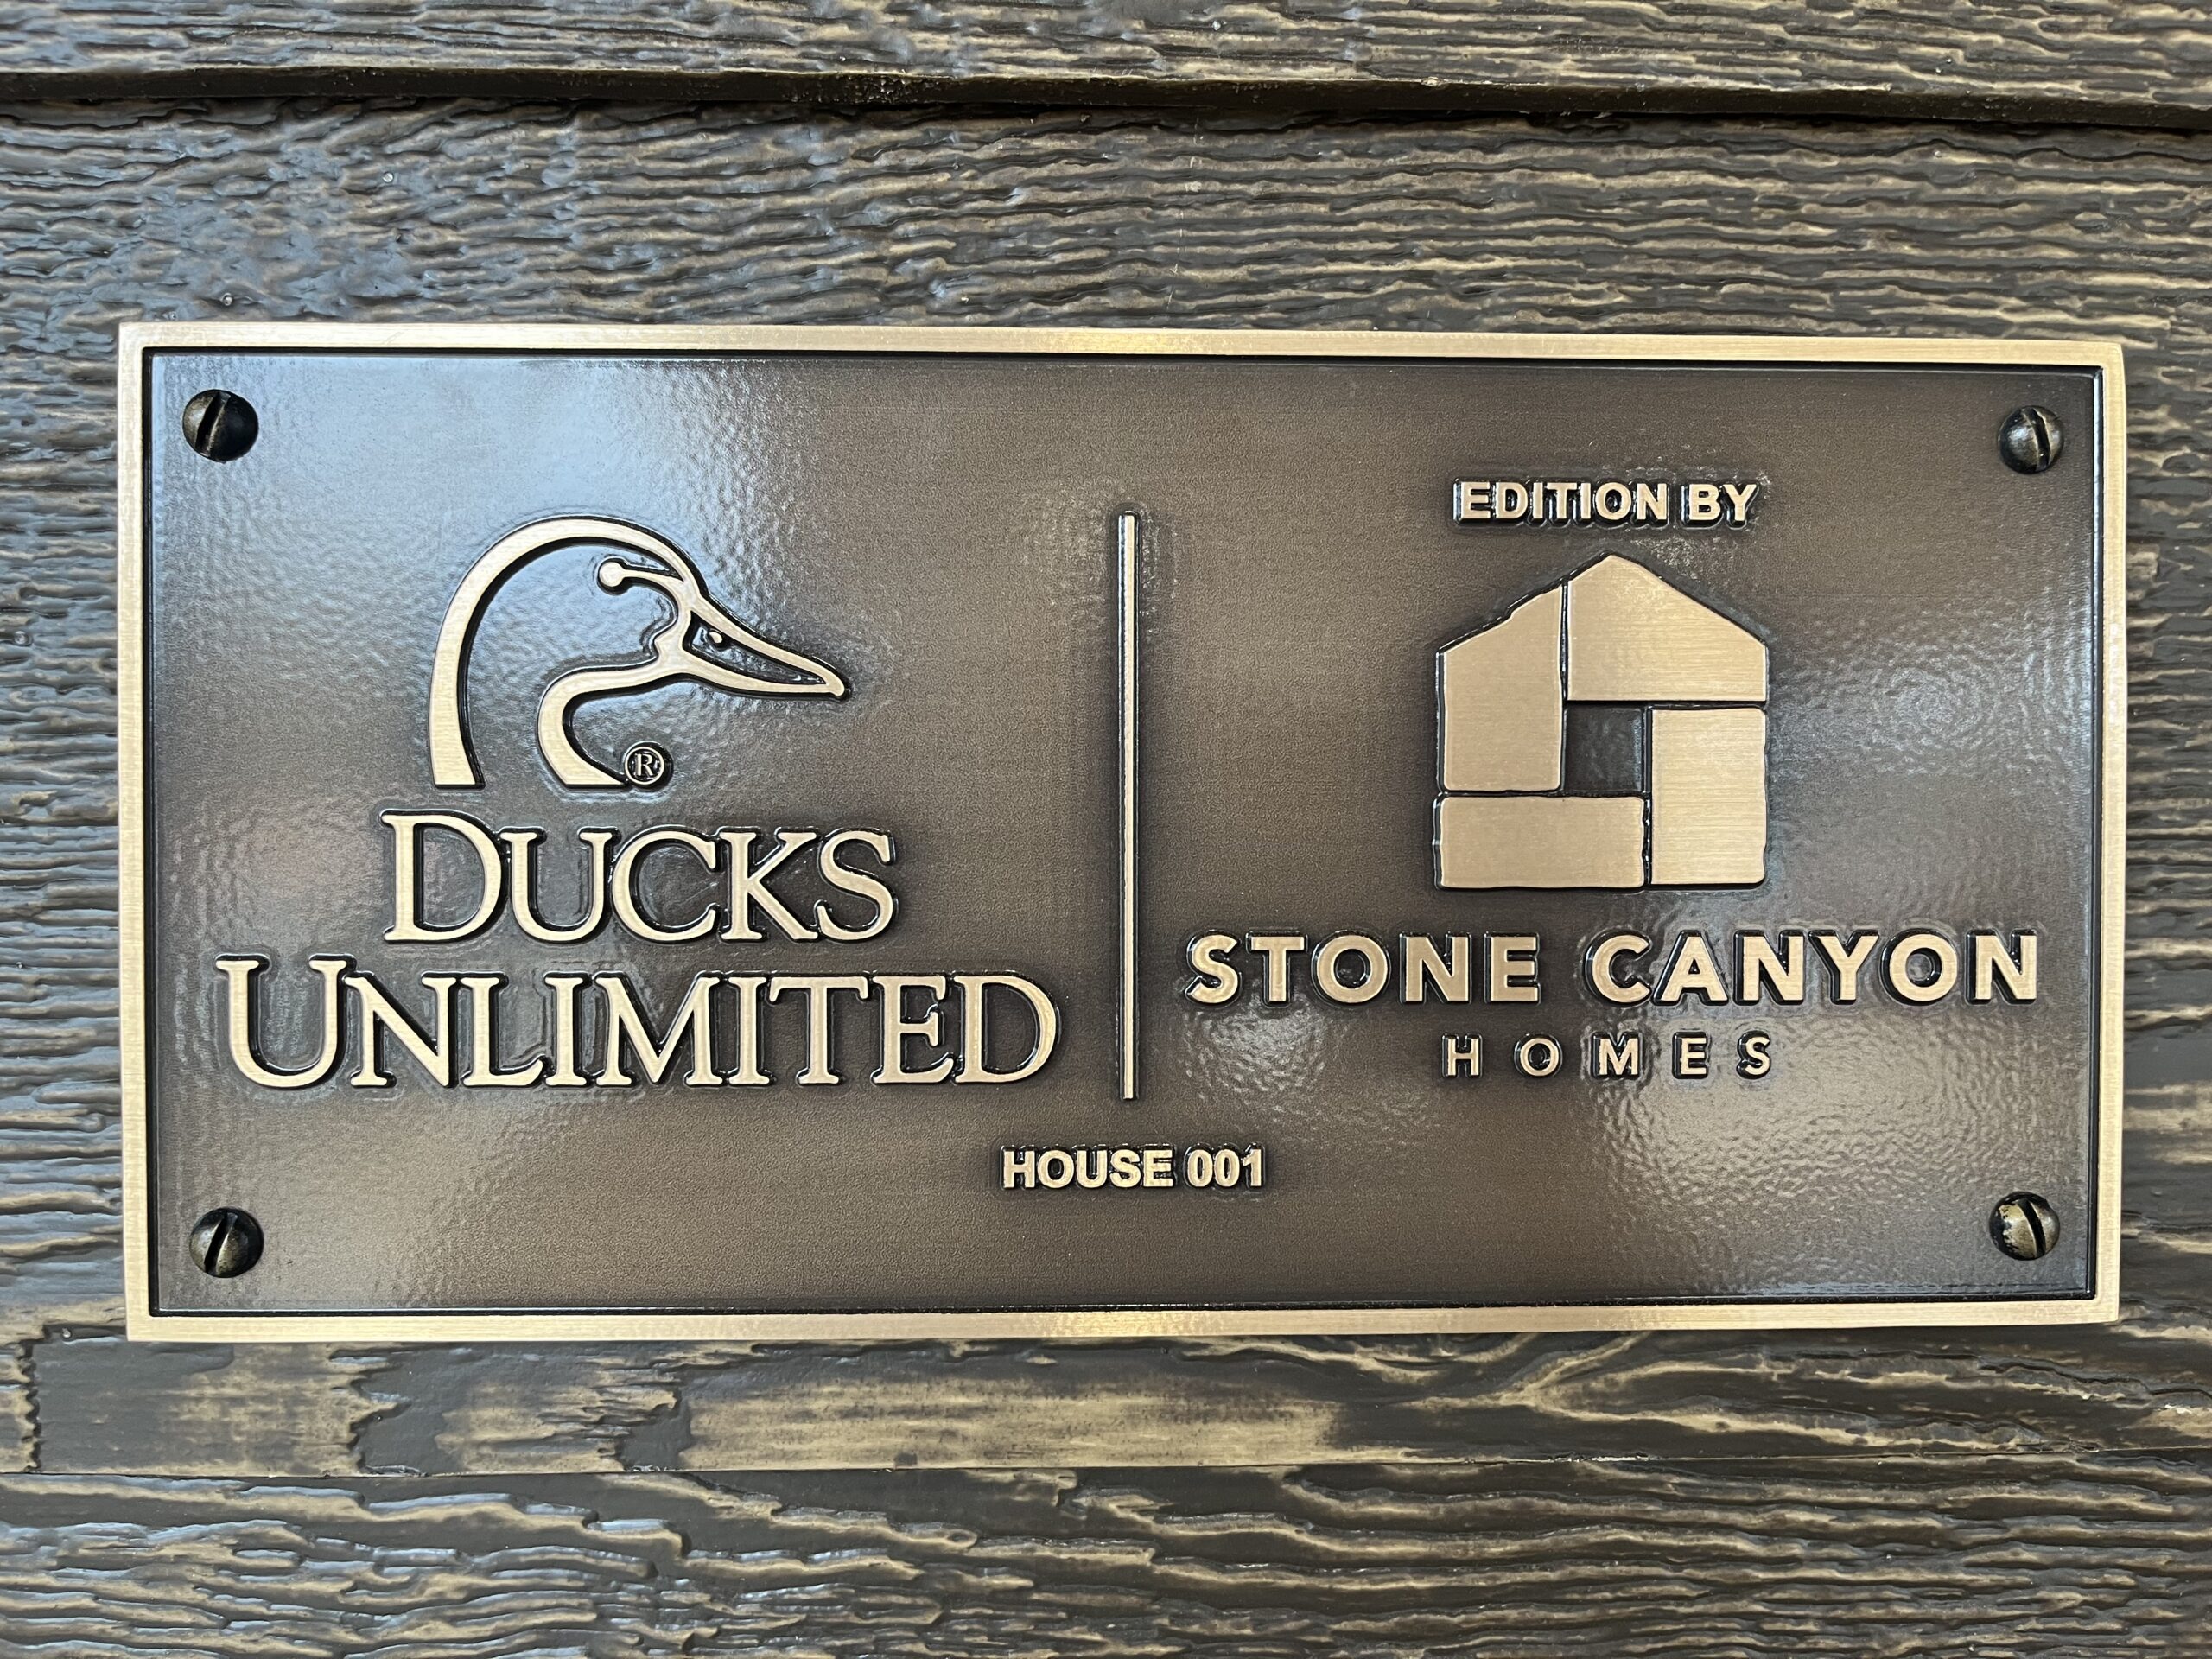 Stone Canyon Homes and Ducks Unlimited Announce New, Multi-year Partnership